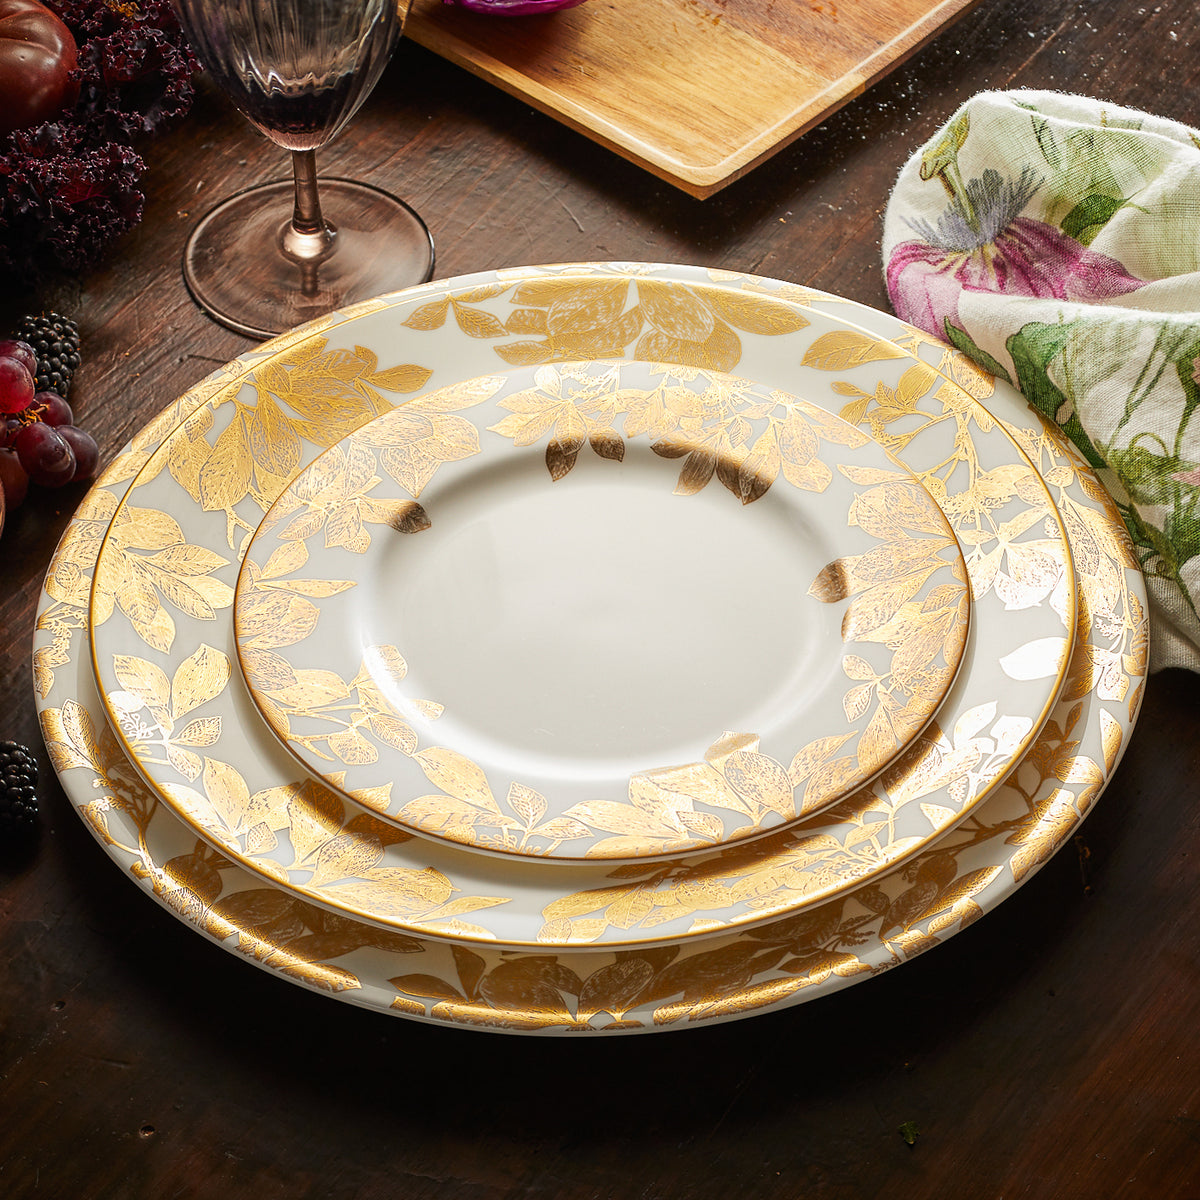 Three stacked Arbor Gold Rimmed Charger plates by Caskata Artisanal Home, adorned with intricate gold leaf patterns, are displayed on a wooden table, accompanied by a wine glass, a patterned napkin, and assorted fruits in the background.